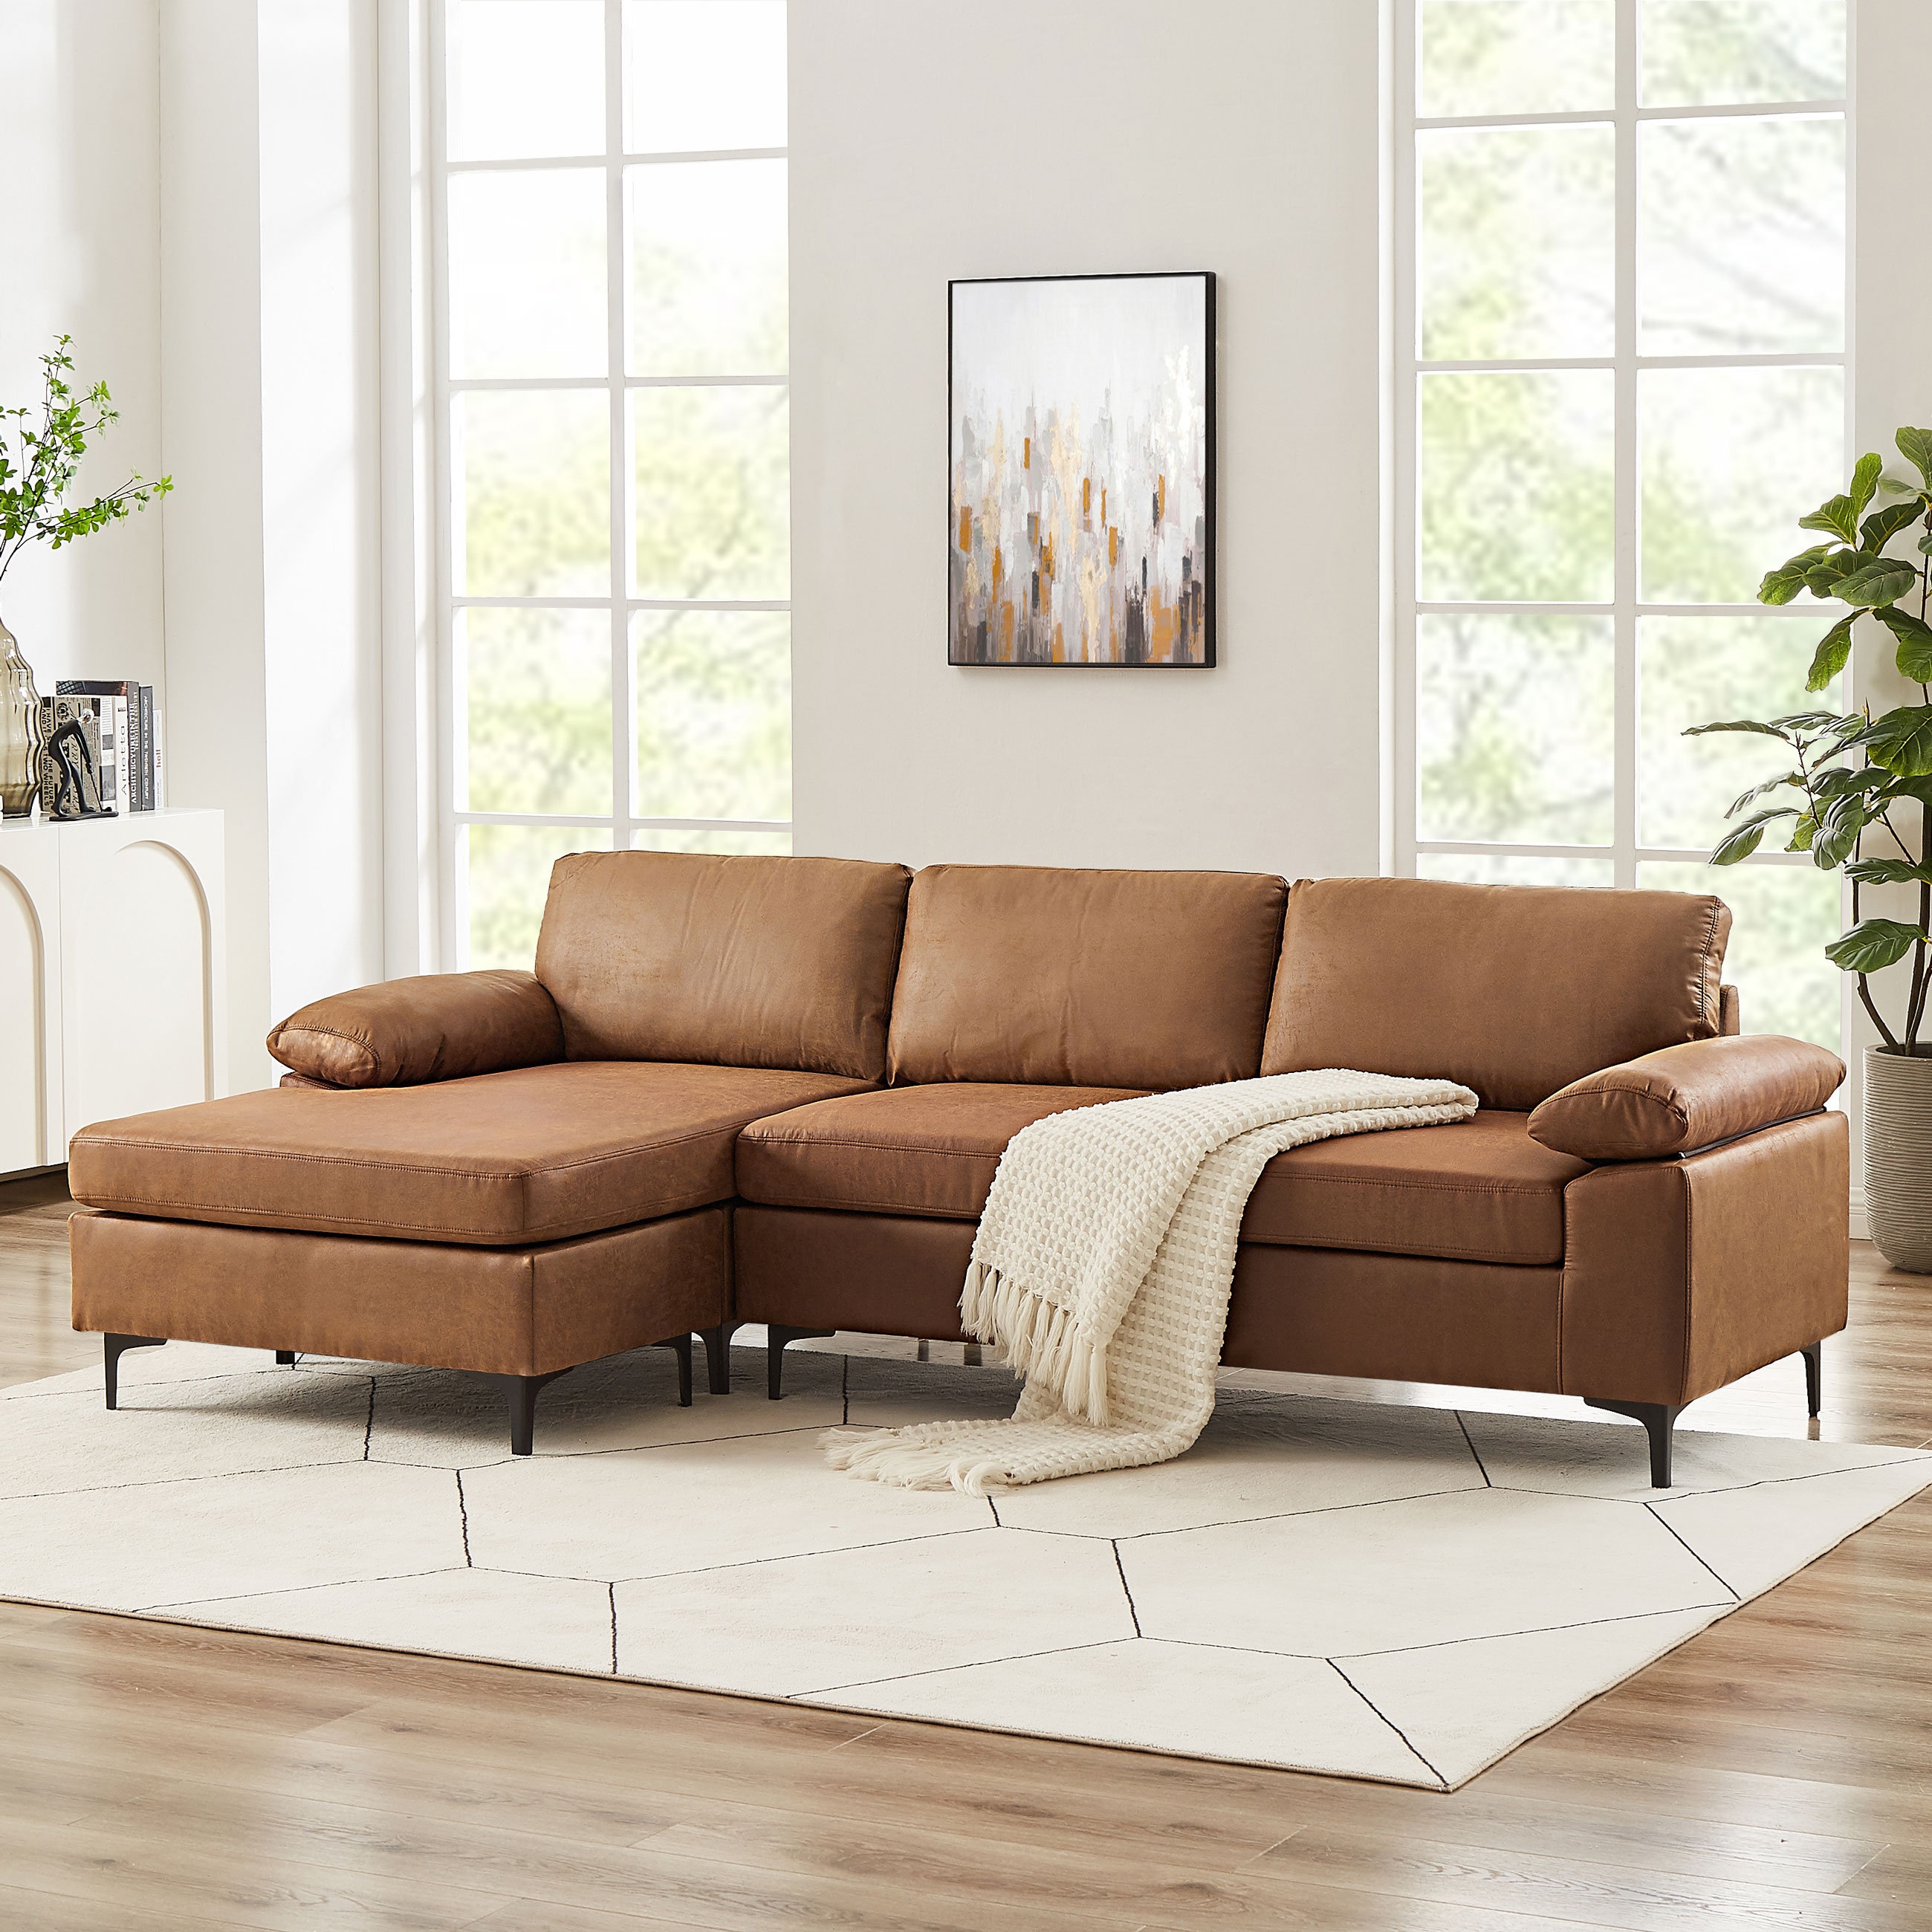 Small Leather Sectional Visualhunt